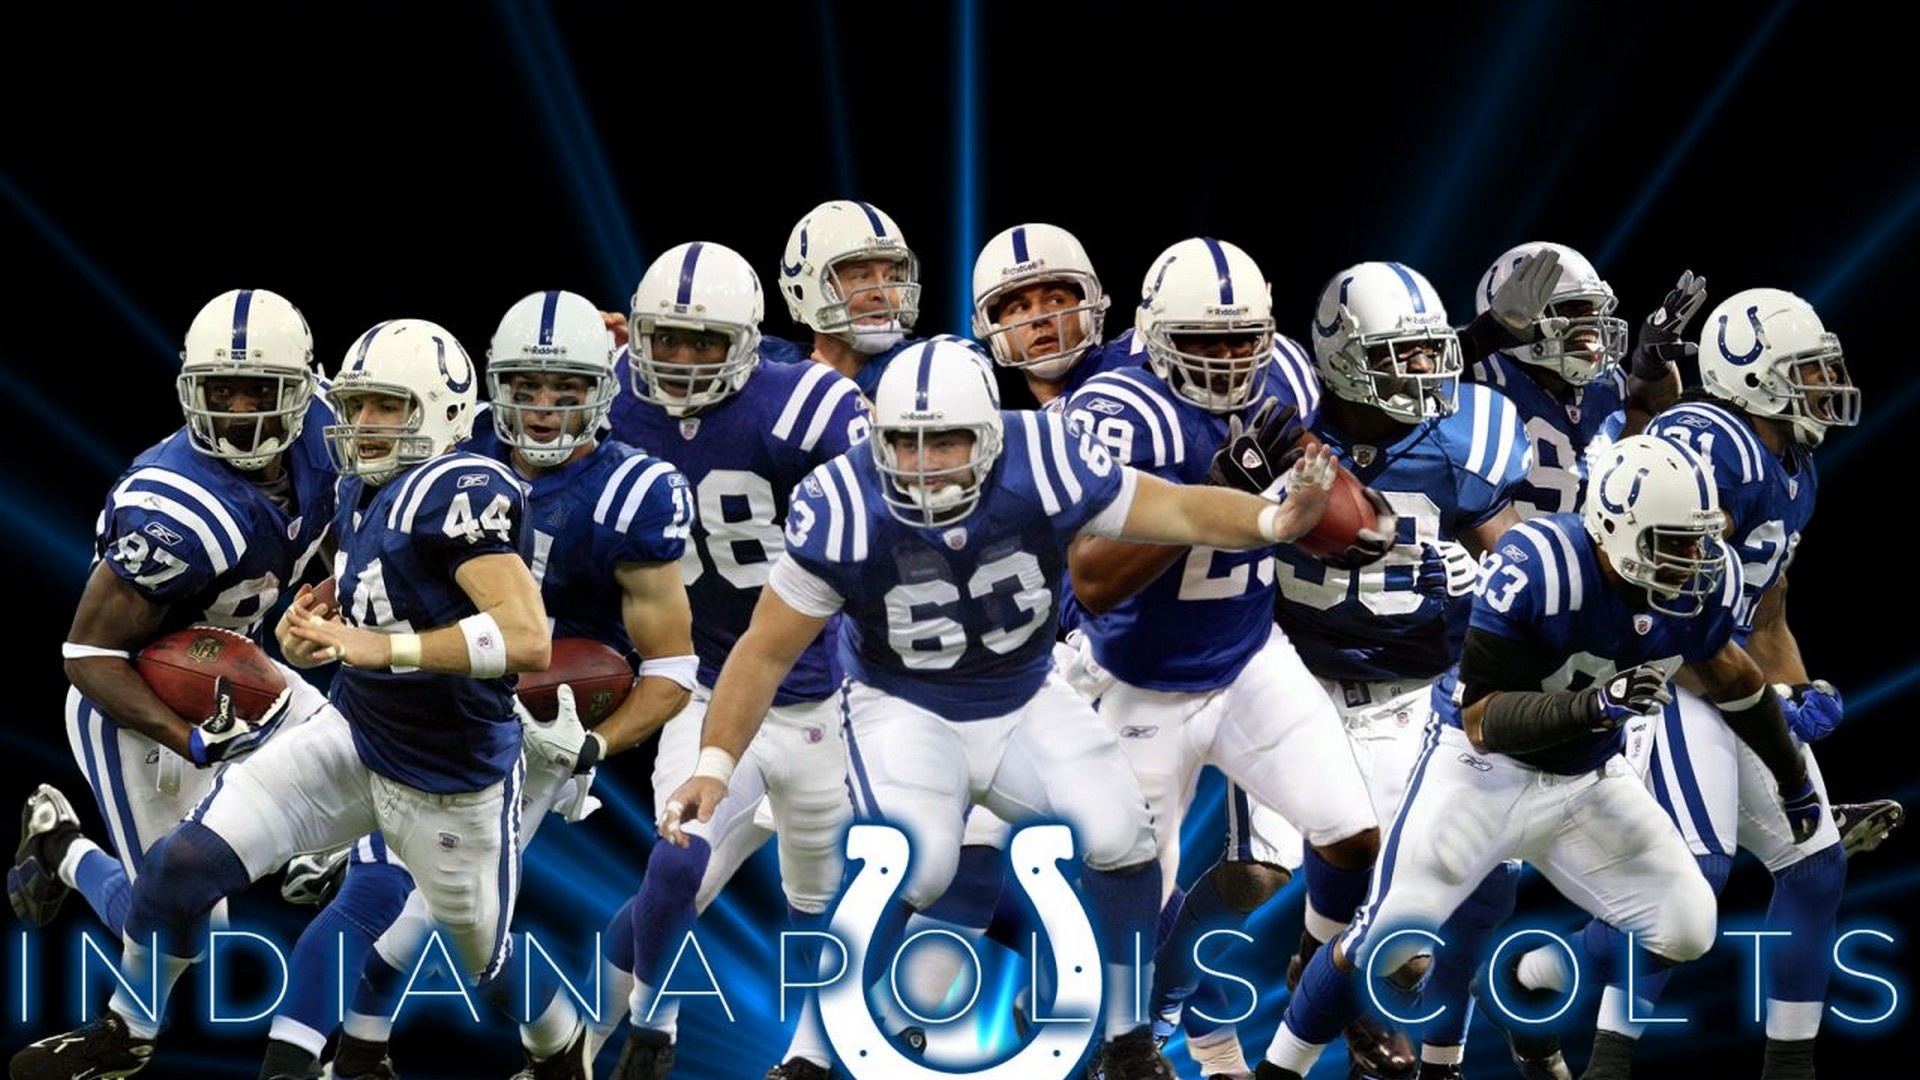 HD Indianapolis Colts, NFL backgrounds, 2020, Colts, 1920x1080 Full HD Desktop